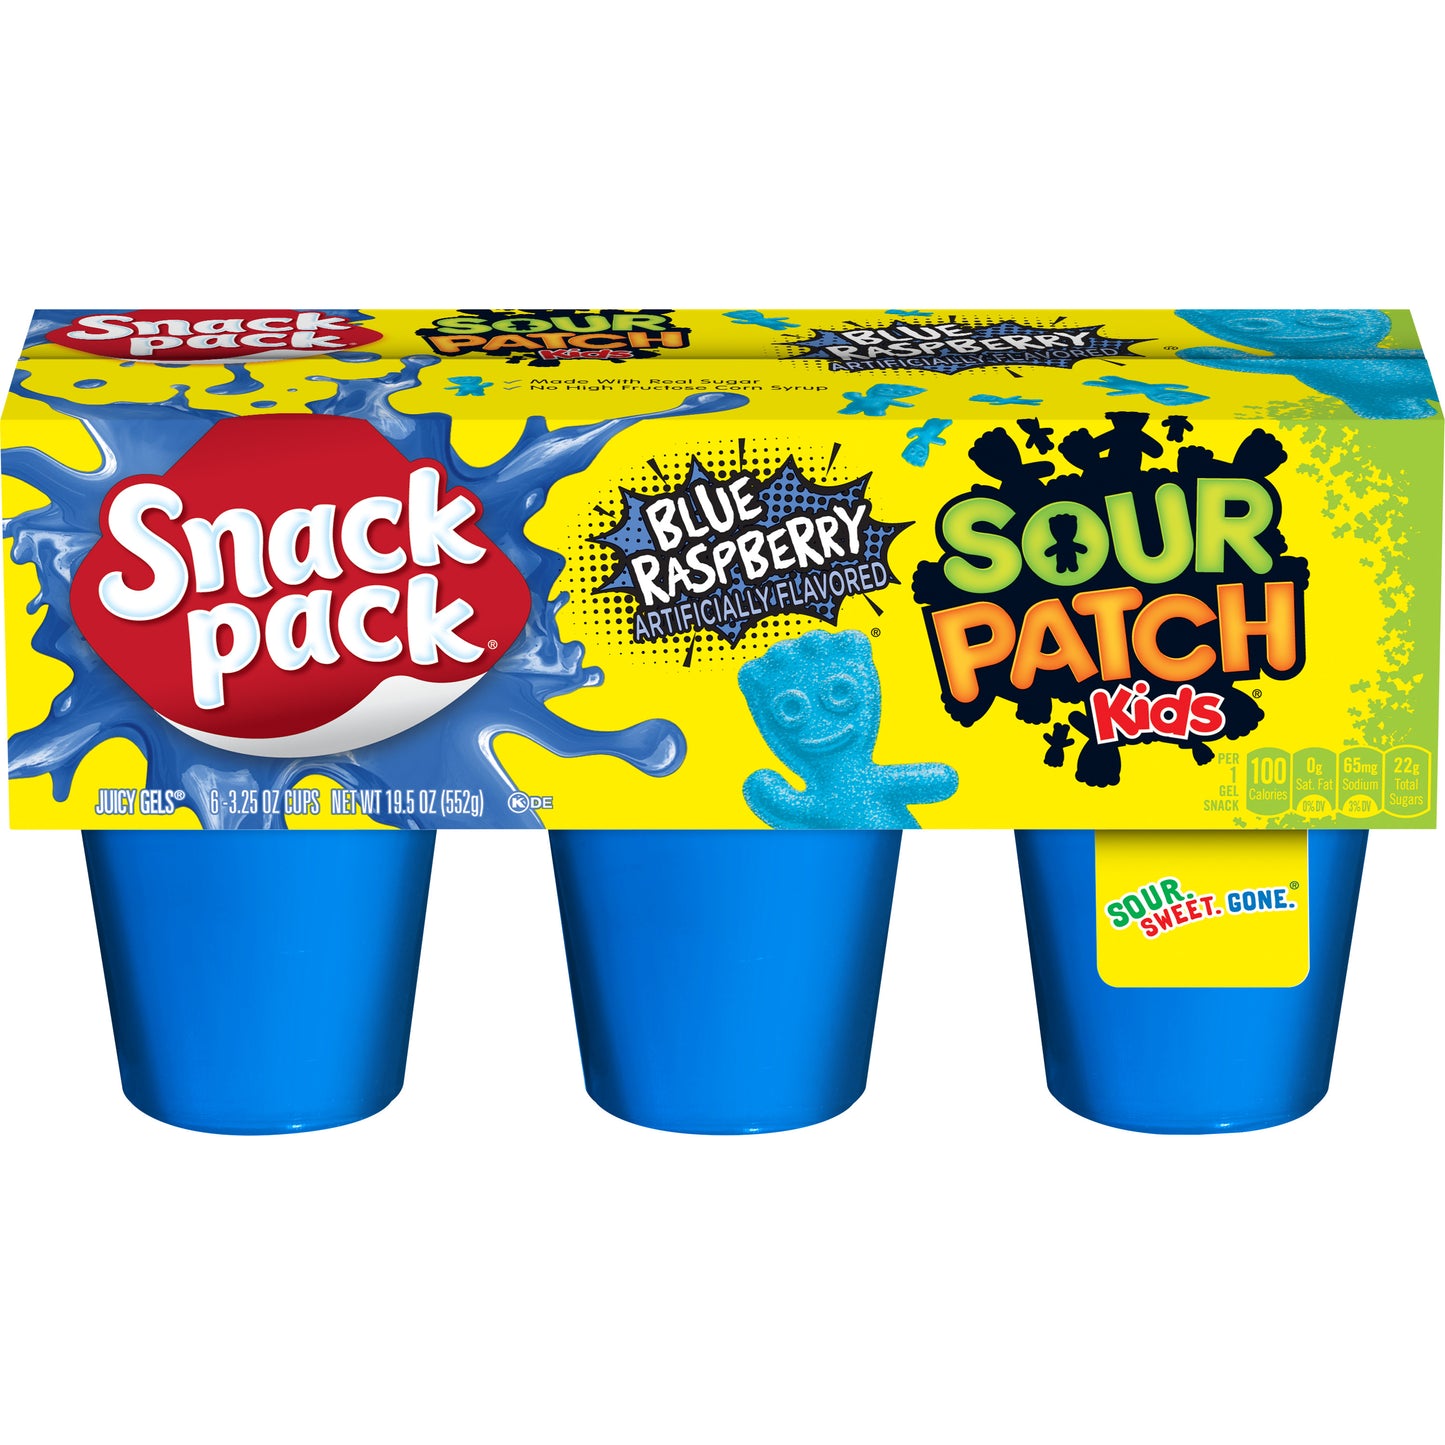 Snack Pack Sour Patch Gel Pack Blue Raspeberry 3.25oz (92g)